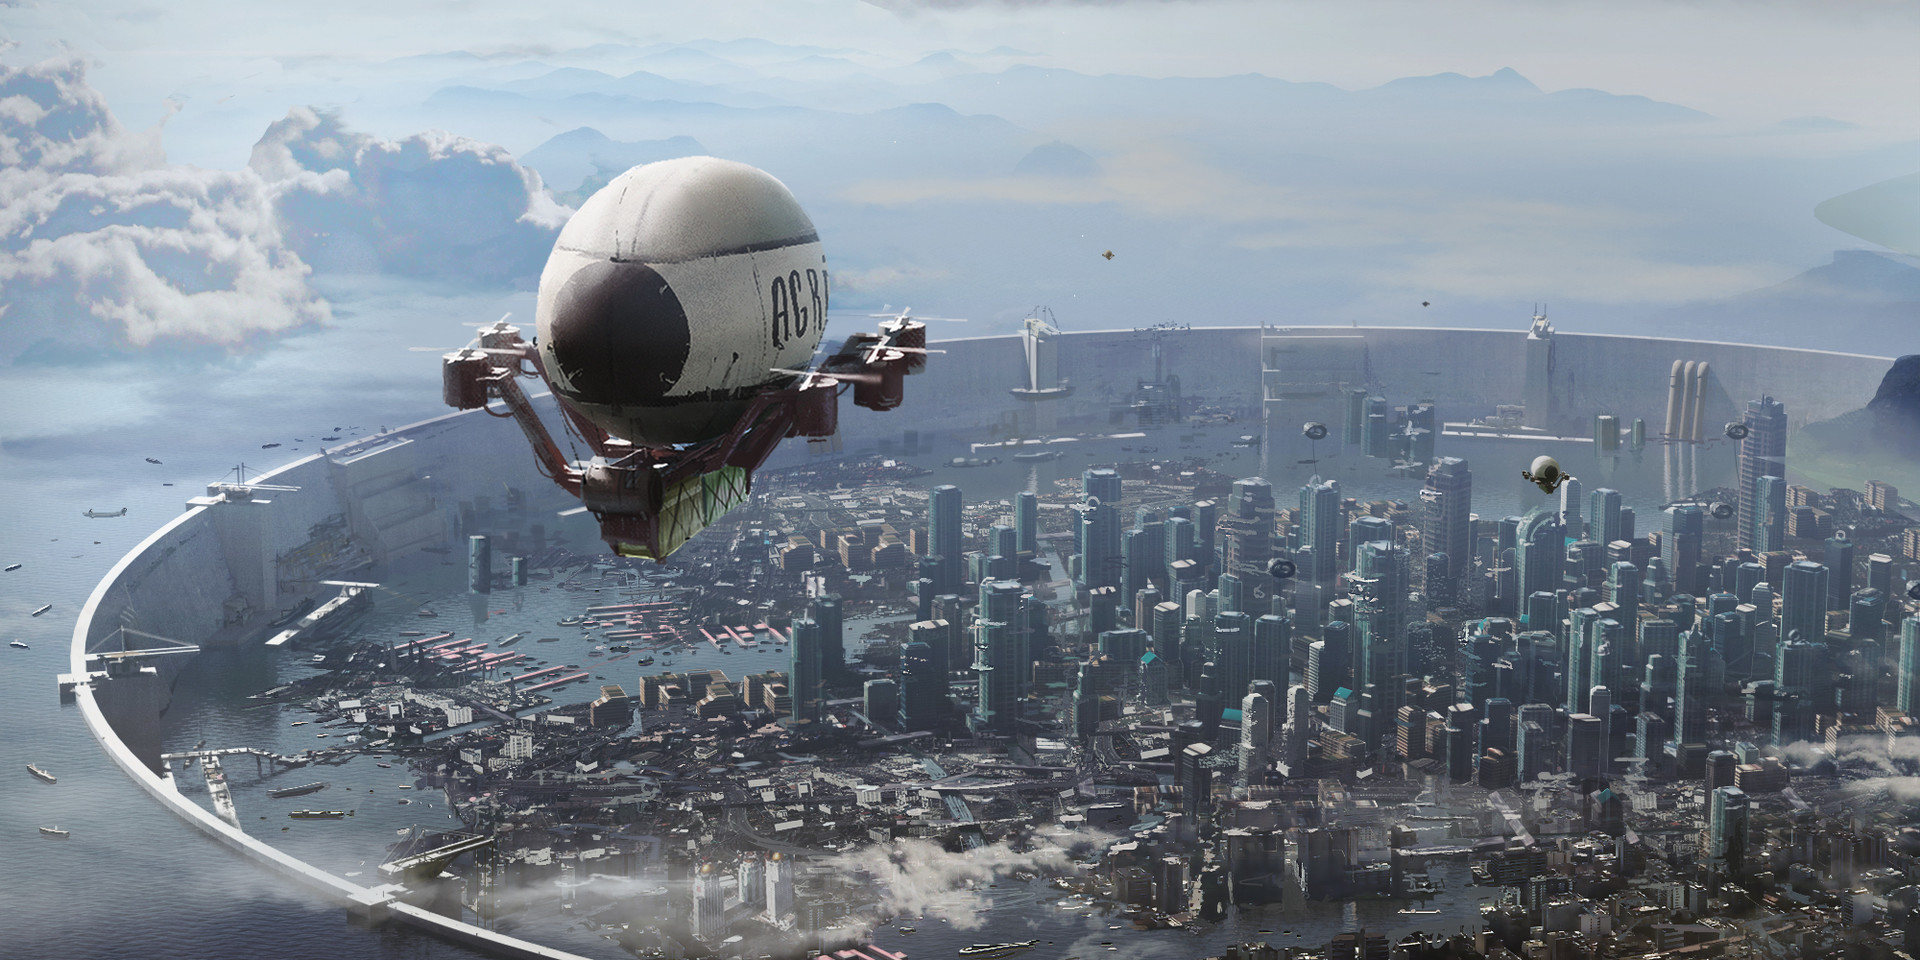 General 1920x960 wall skyscape skyscraper futuristic global warming clouds airships ship container ship town sea aerial view futuristic city Bangkok Julien Gauthier Futurism